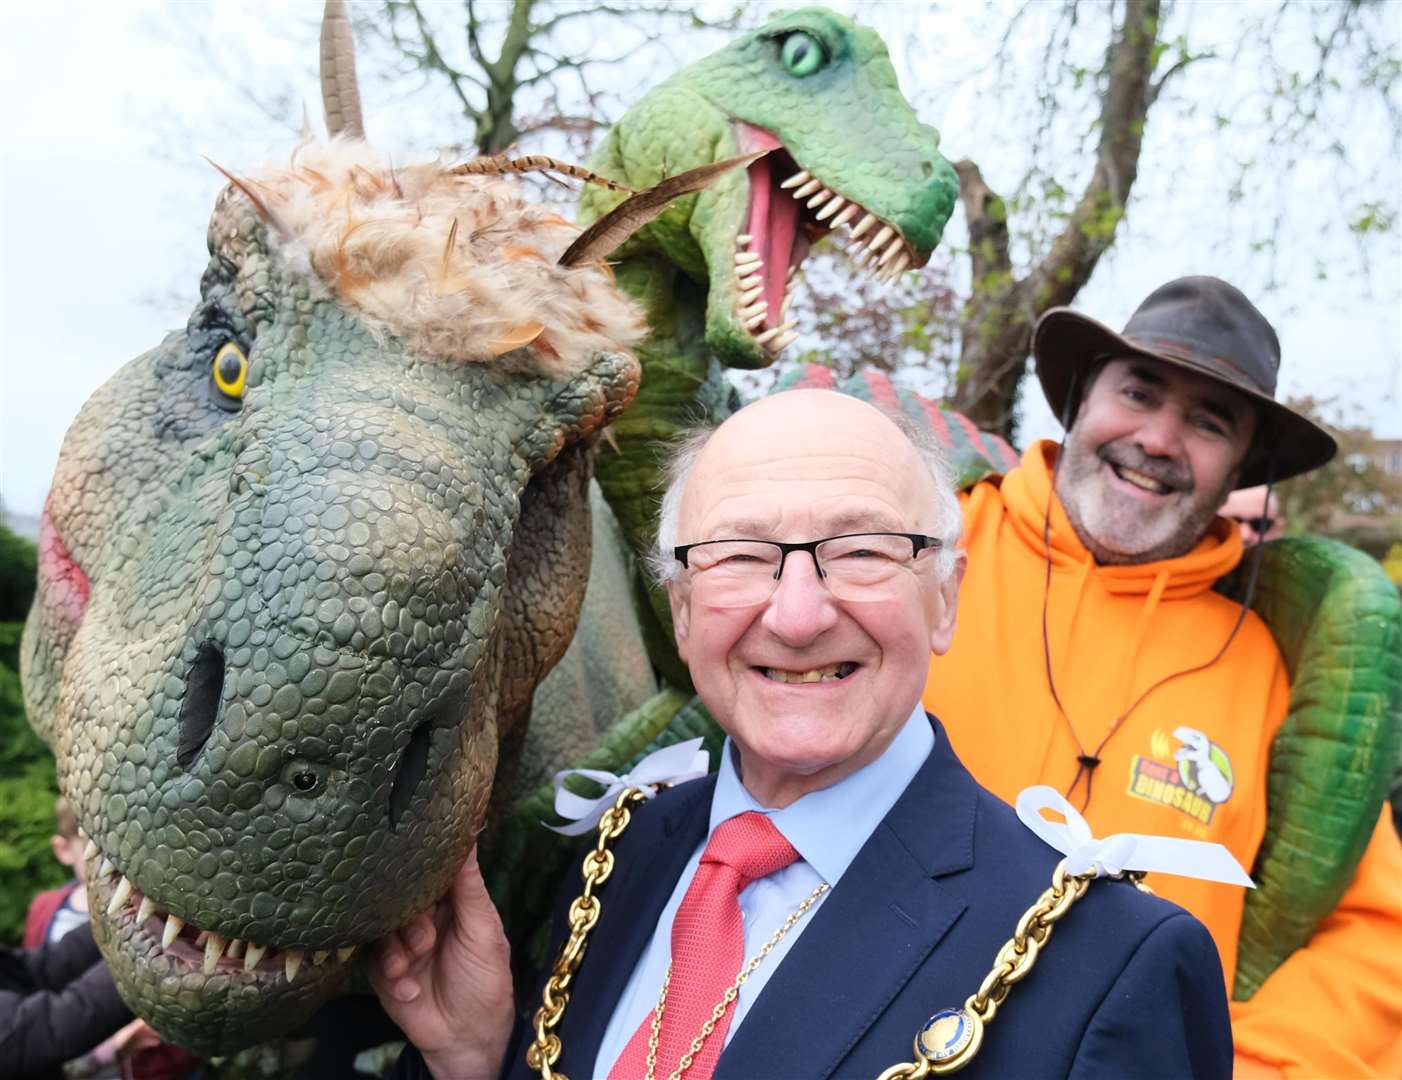 The Mayor of Maidstone Cllr Gordon Newton with some of the sculptures included in the Magical Beasts sculpture trail